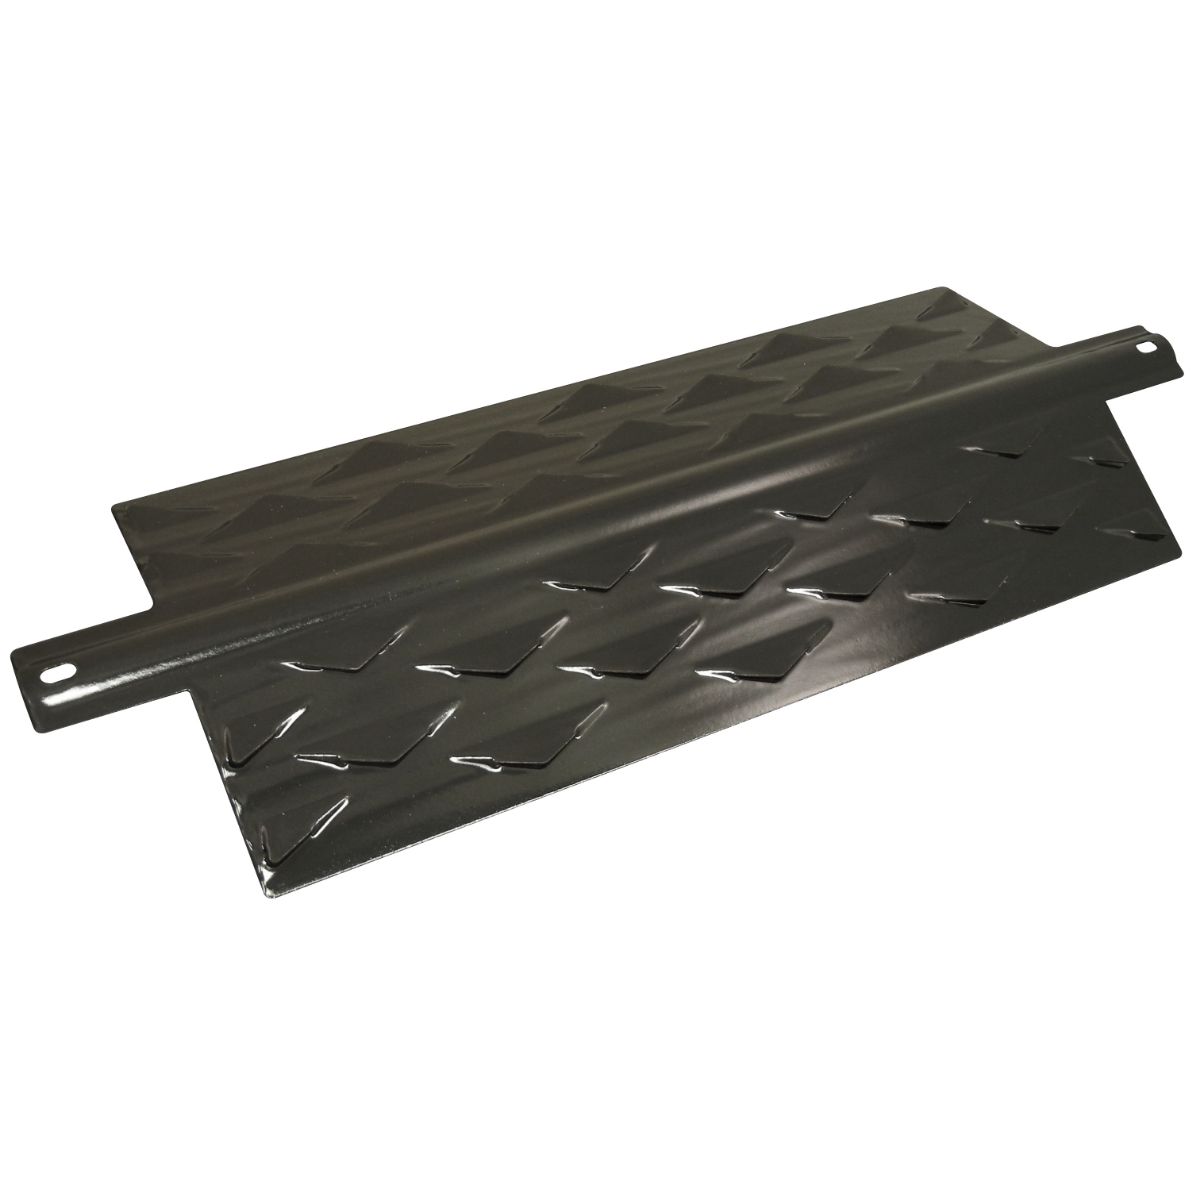 Porcelain steel heat plate for Aussie, Blooma, Outback, Sahara brand gas grills